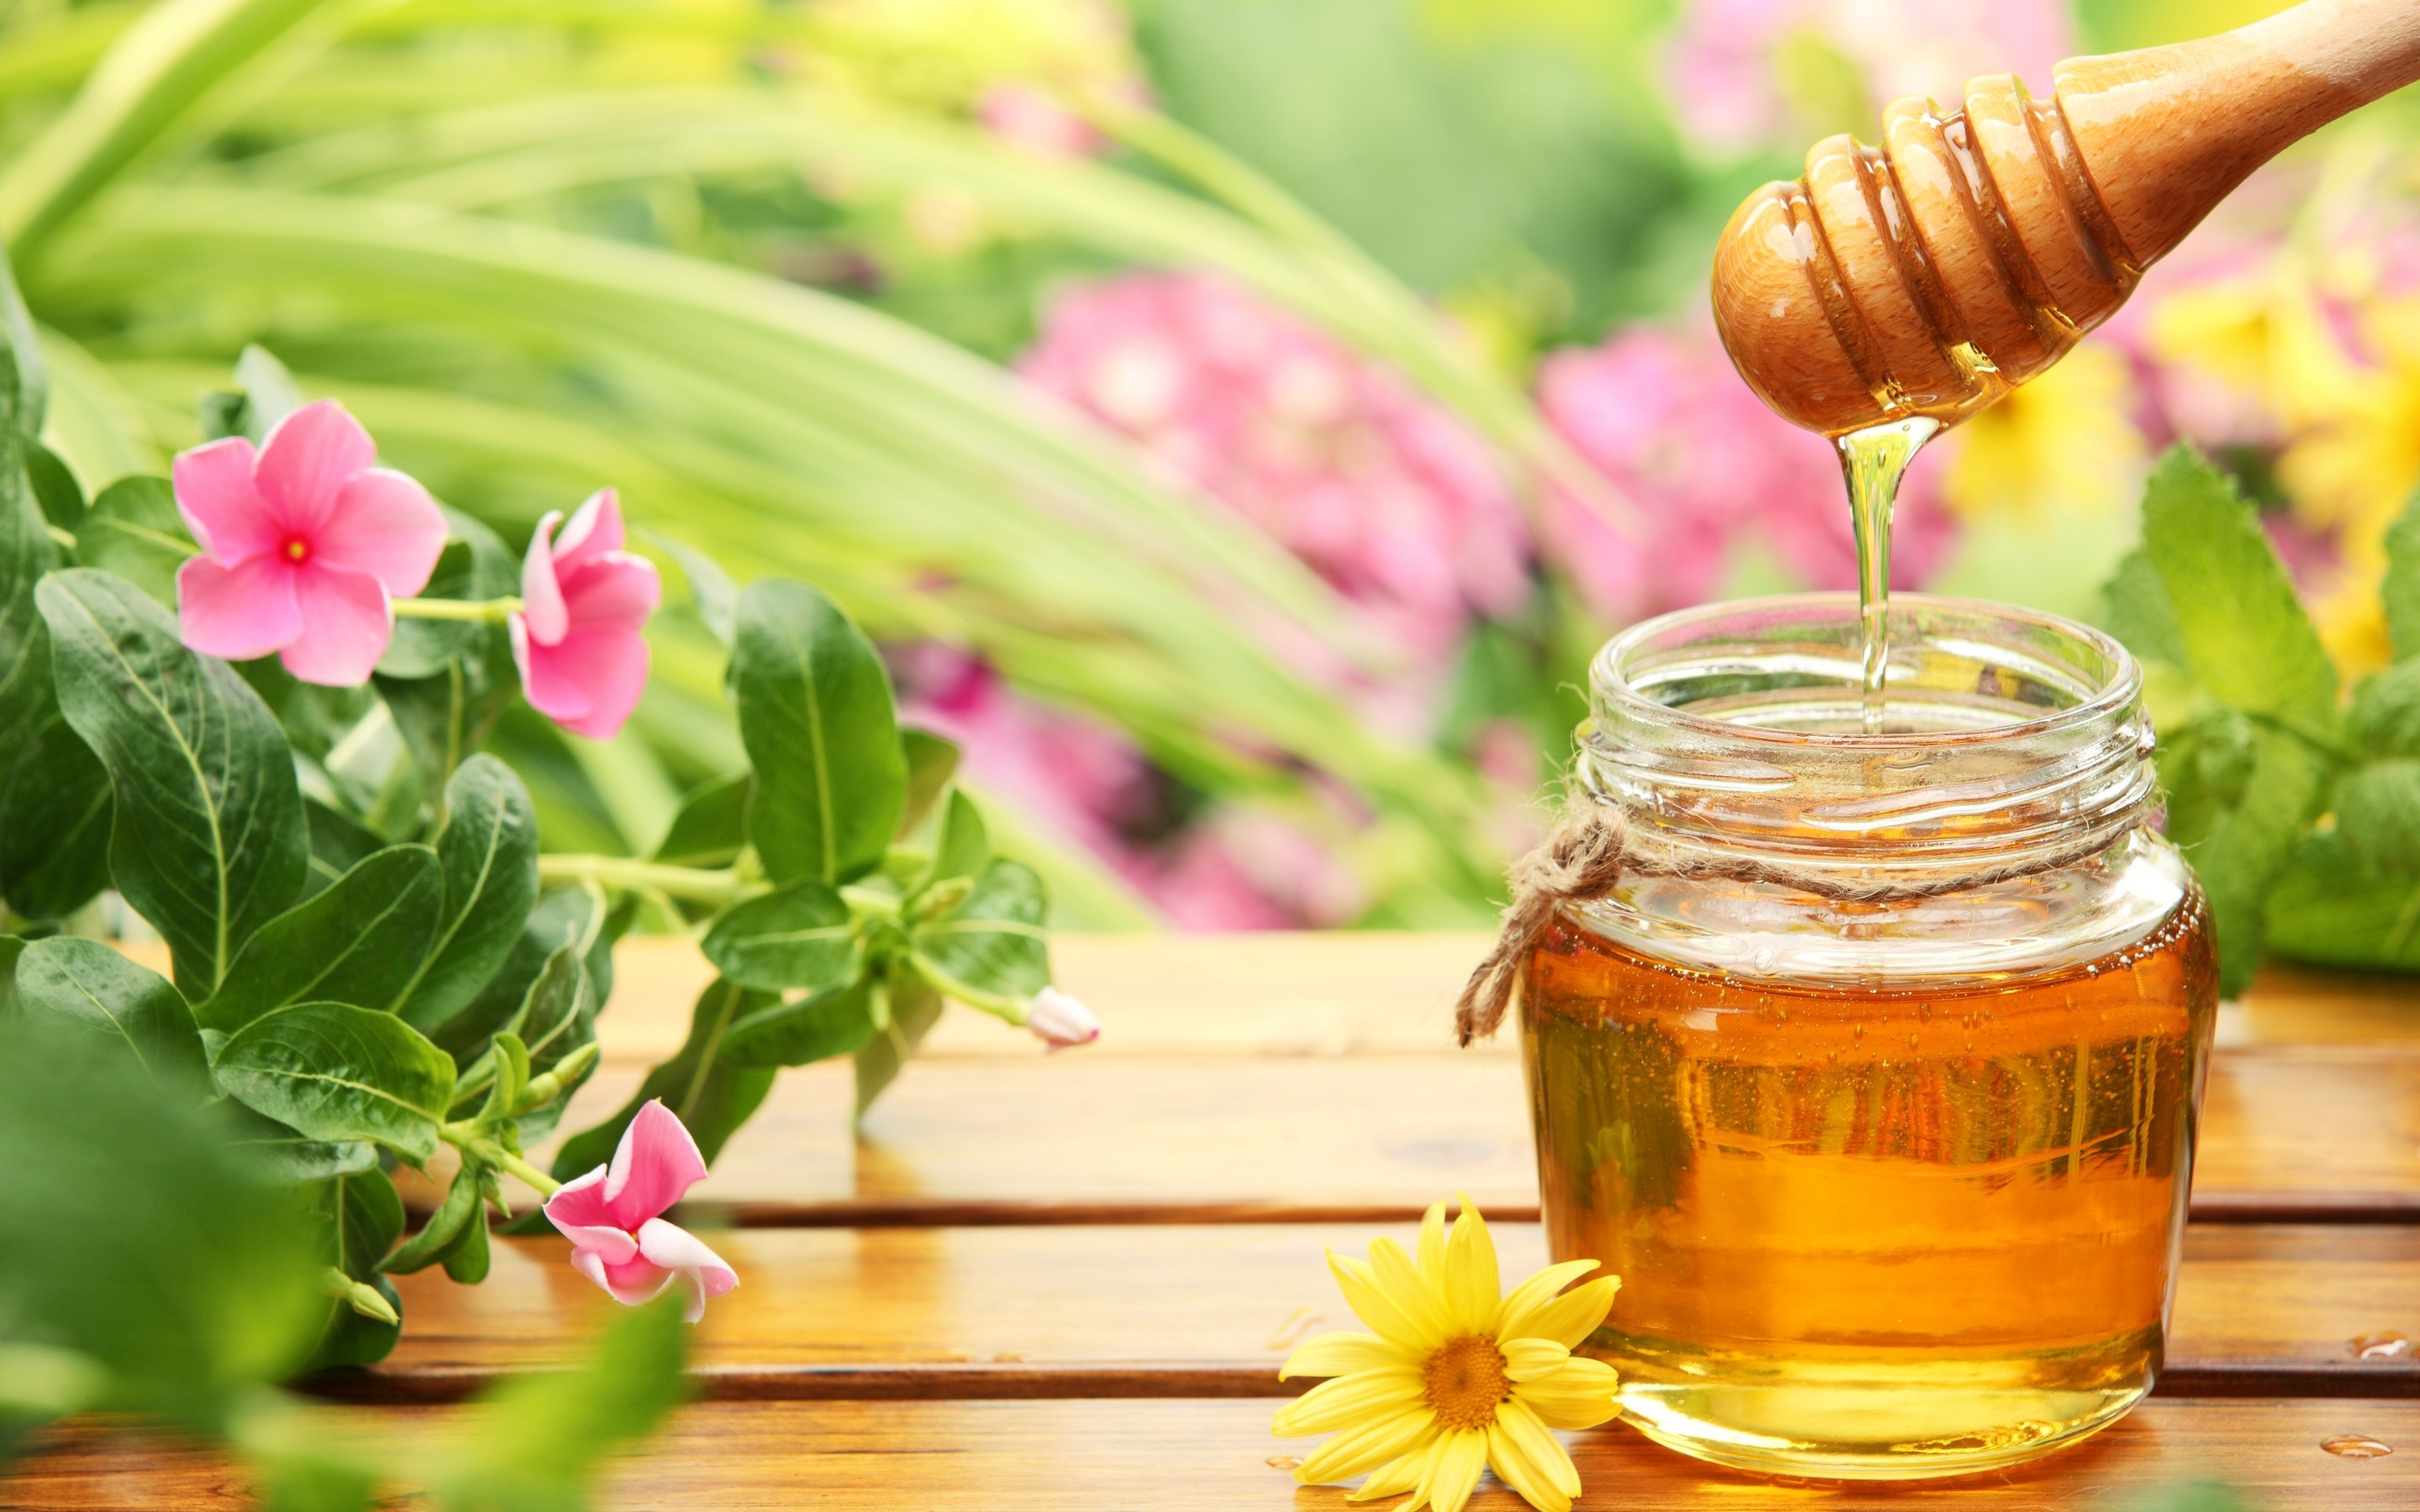 Honey: Produced by bees who have collected nectar or honeydew. 2880x1800 HD Wallpaper.